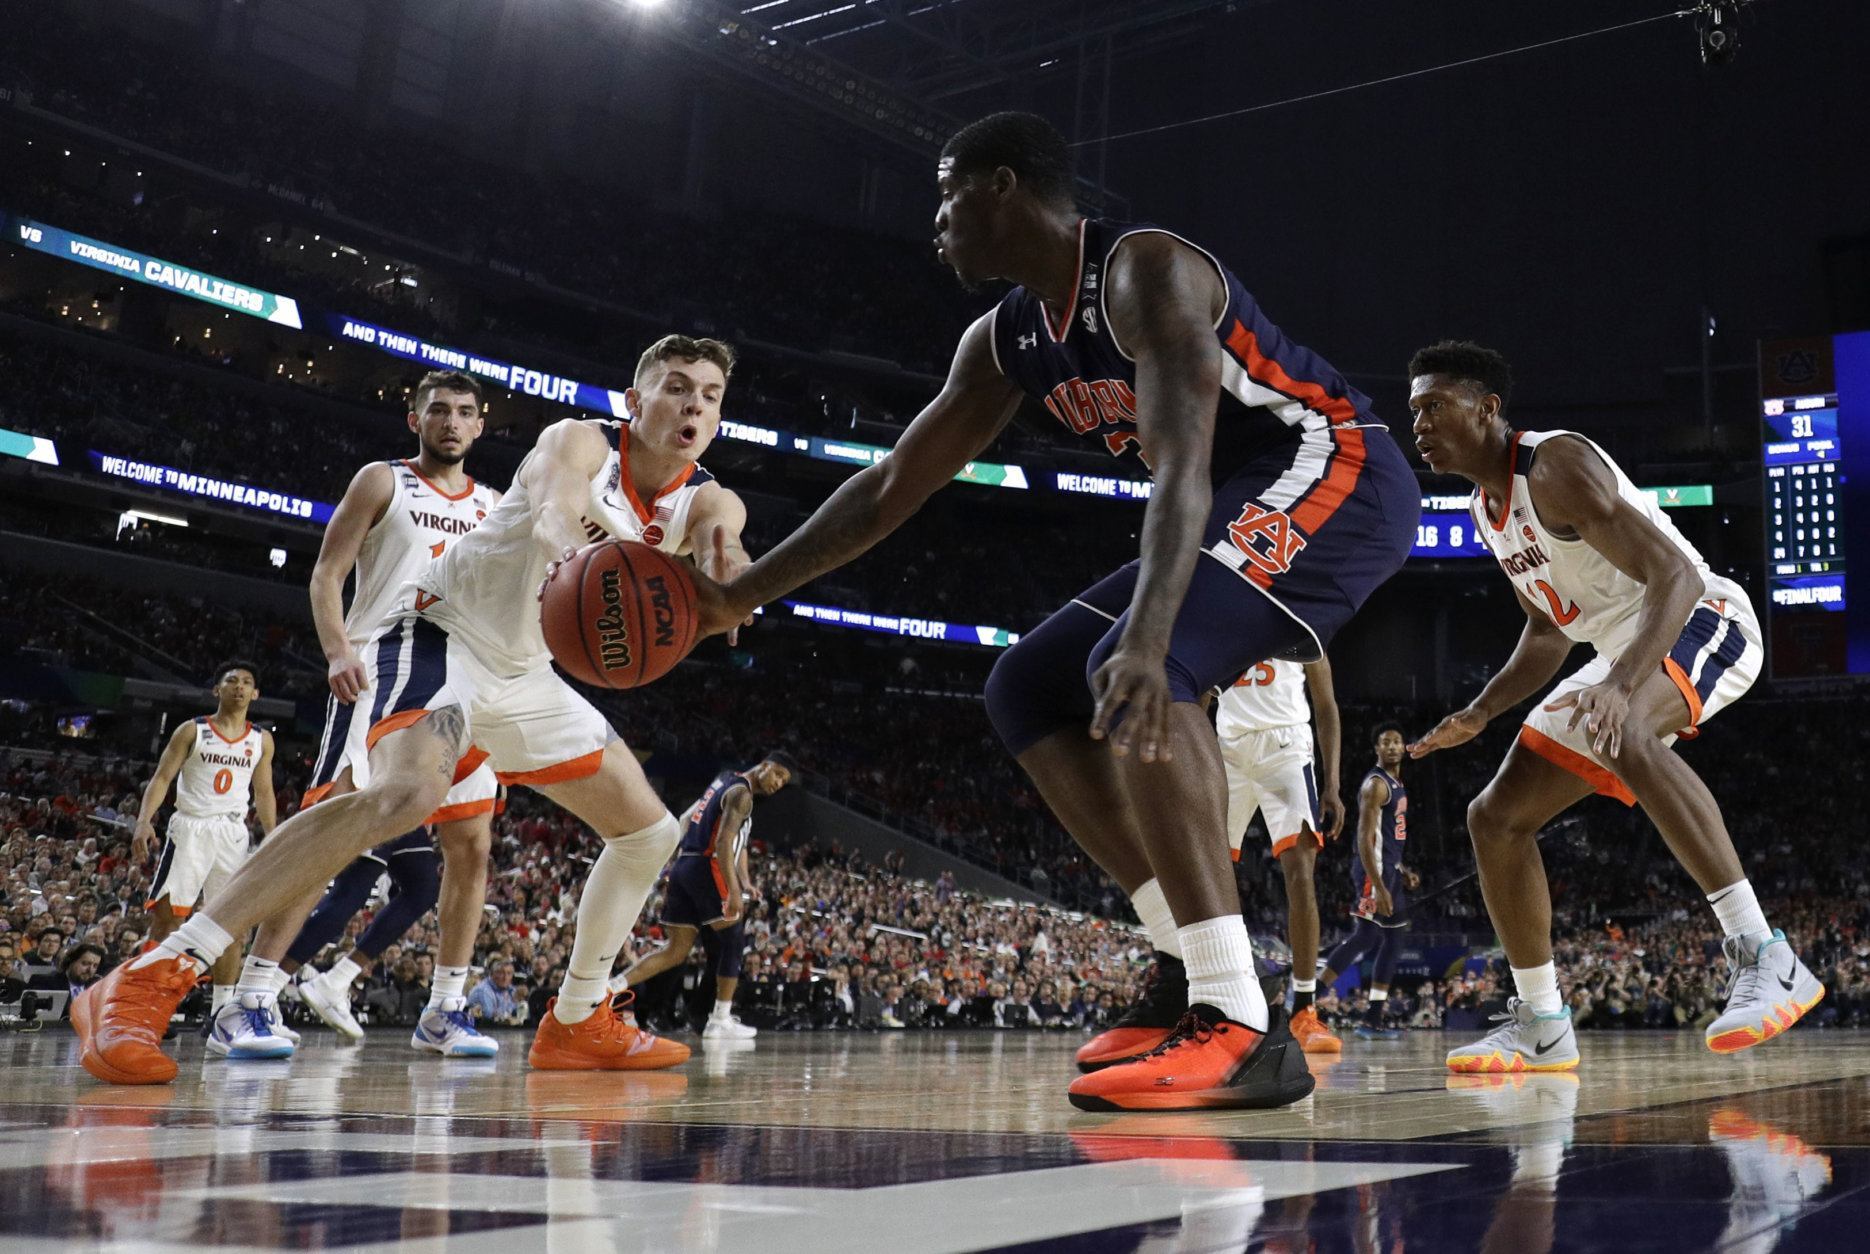 Virginia guard Kyle Guy, left, fights for a loose ball with Auburn forward Danjel Purifoy during the second half in the semifinals of the Final Four NCAA college basketball tournament, Saturday, April 6, 2019, in Minneapolis. (AP Photo/Jeff Roberson)